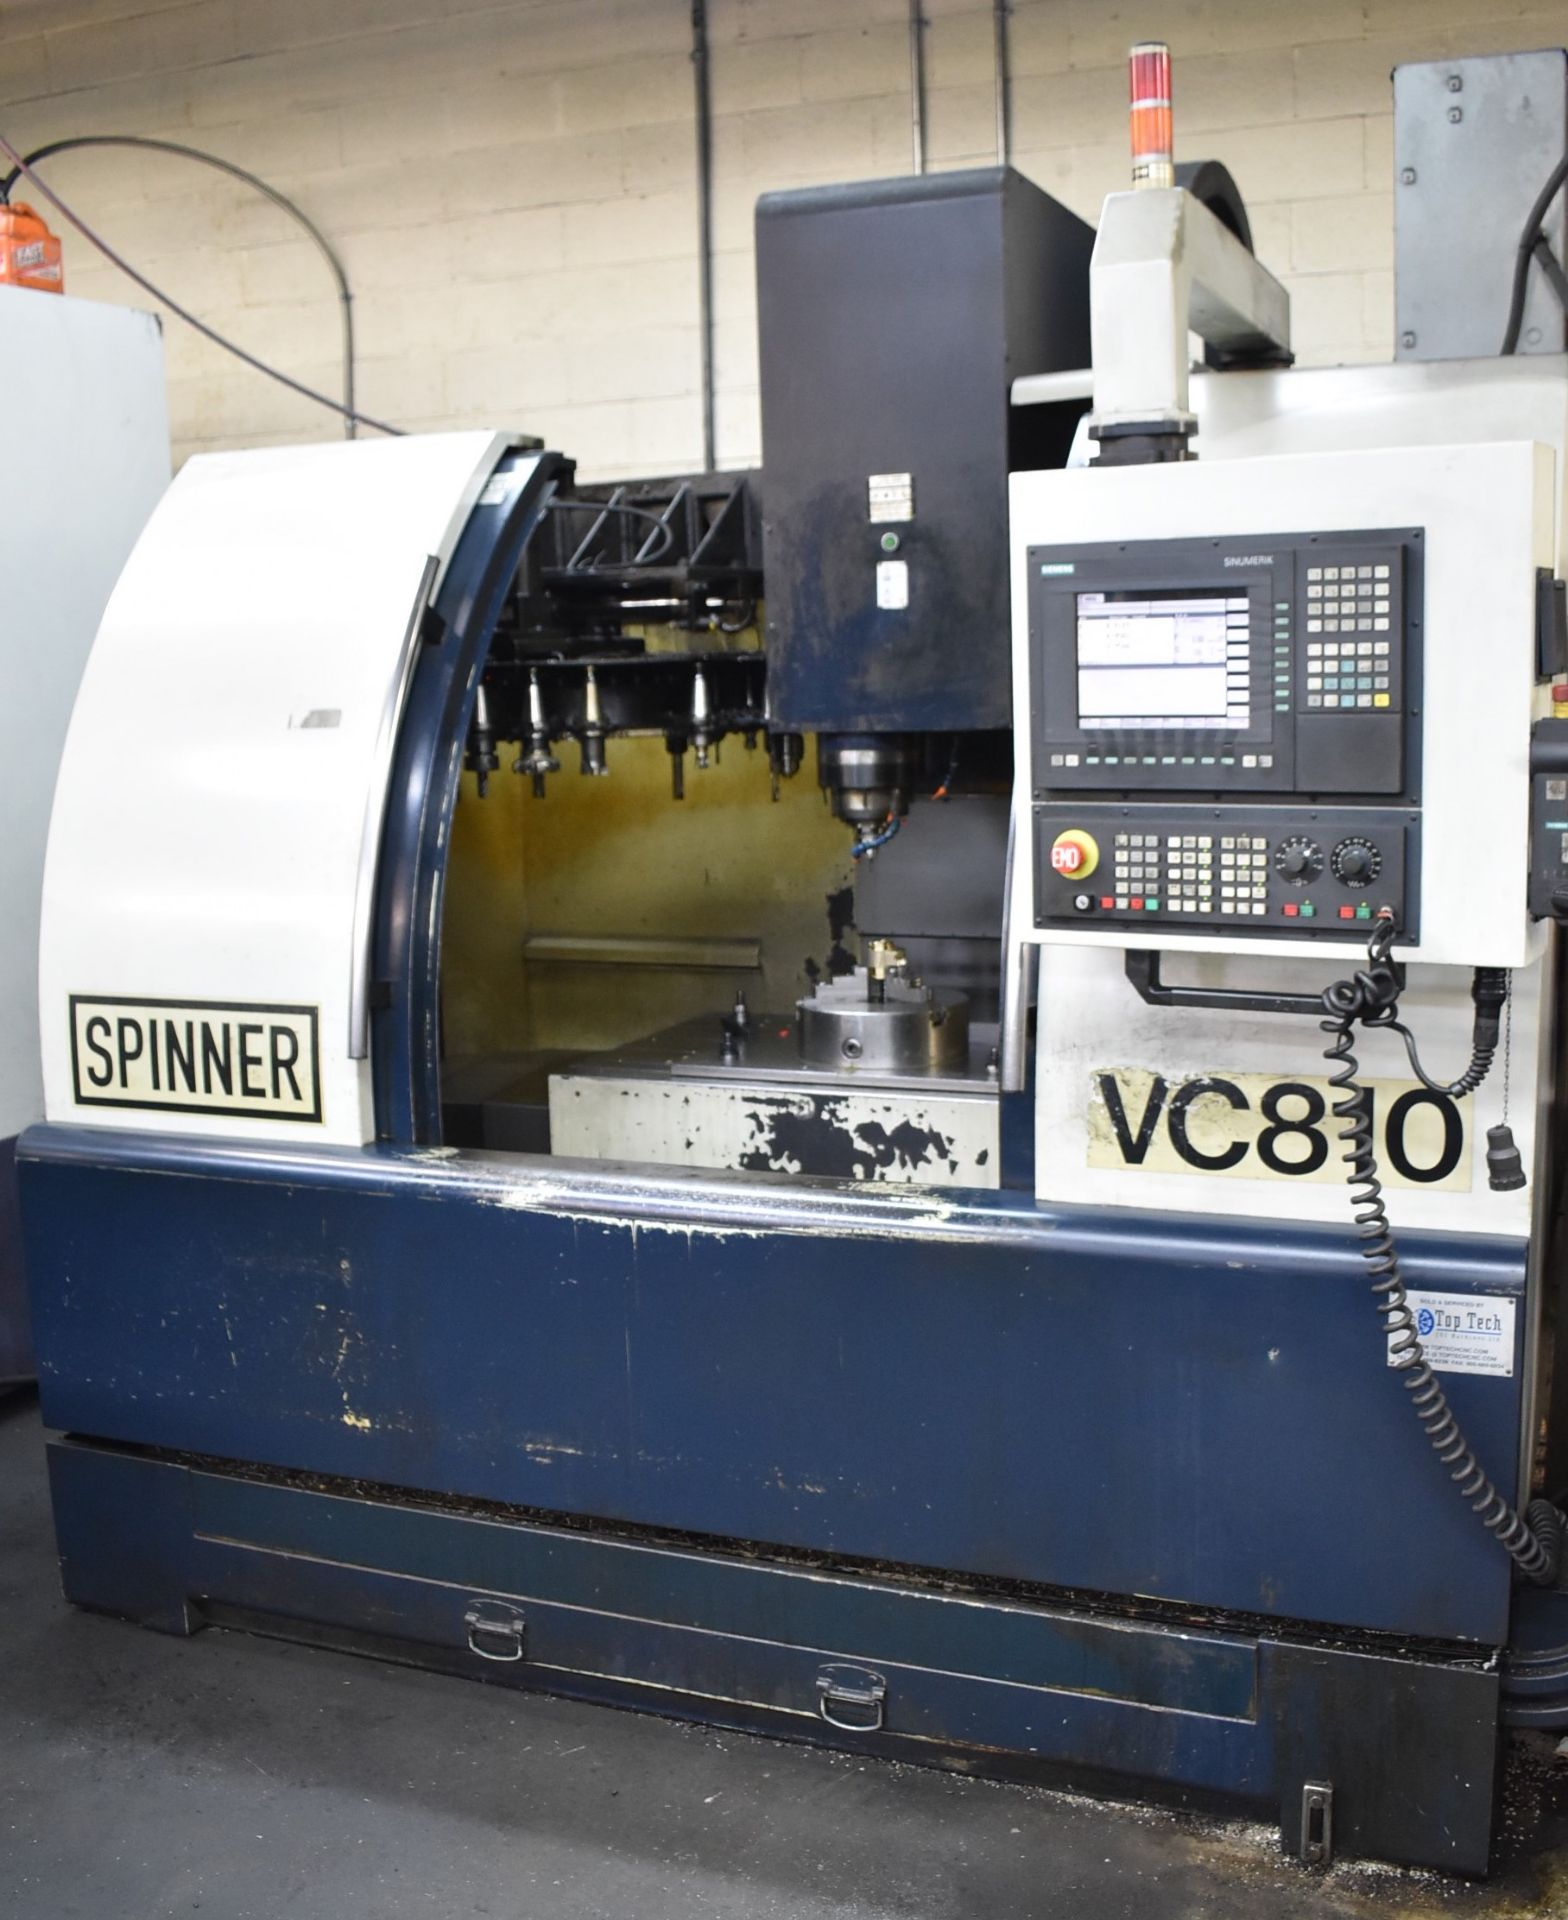 SPINNER VC-810 CNC VERTICAL MACHINING CENTER WITH SIEMENS SINUMERIK CNC CONTROL, 24" X 39" T-SLOT - Image 7 of 7